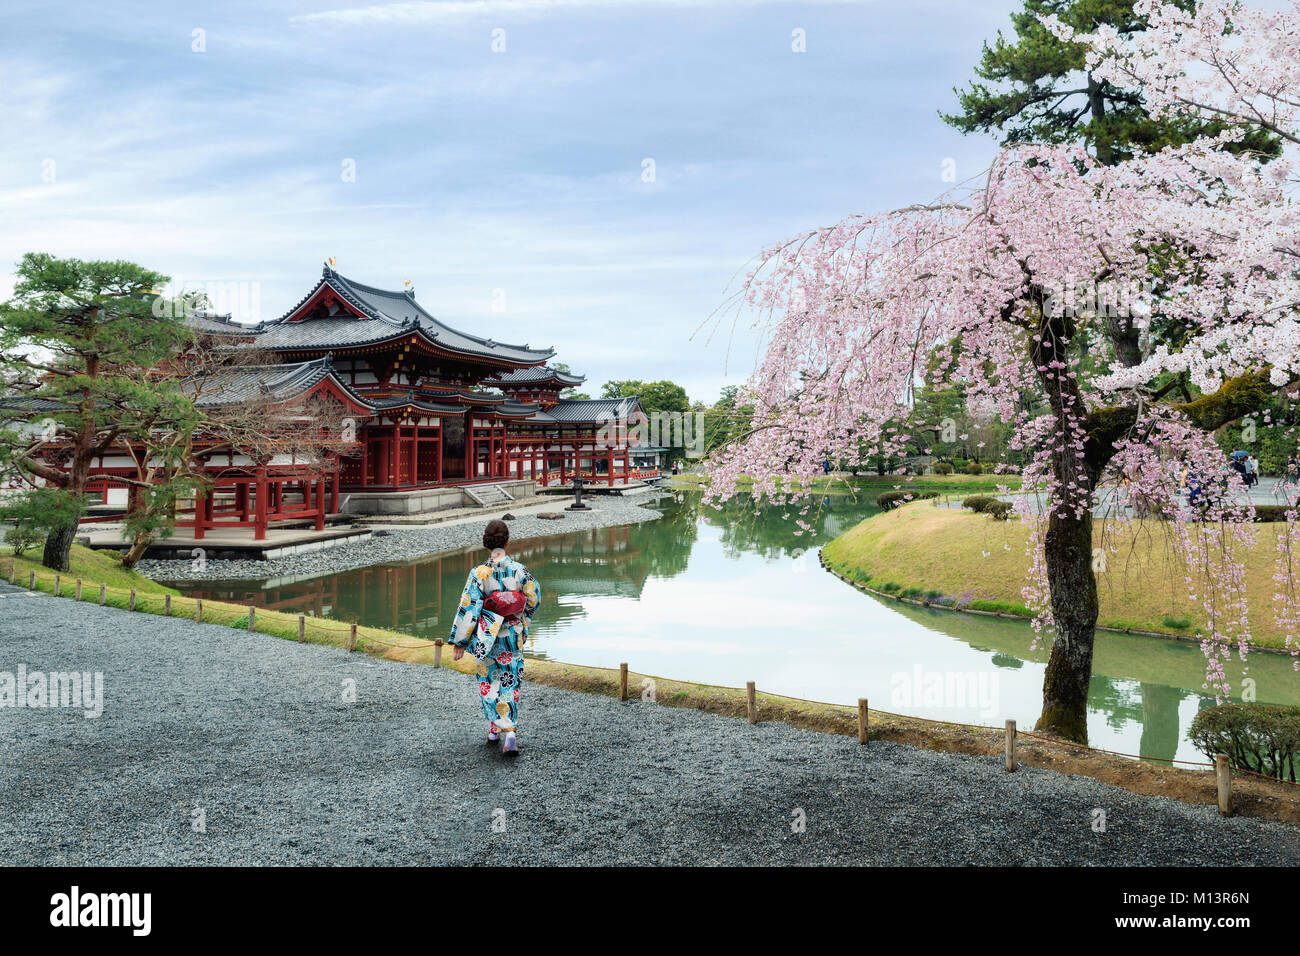 Asian women wearing traditional japanese kimono in Byodo-in Temple in Uji, Kyoto, Japan during spring. Cherry blossom in Kyoto, Japan. Stock Photo